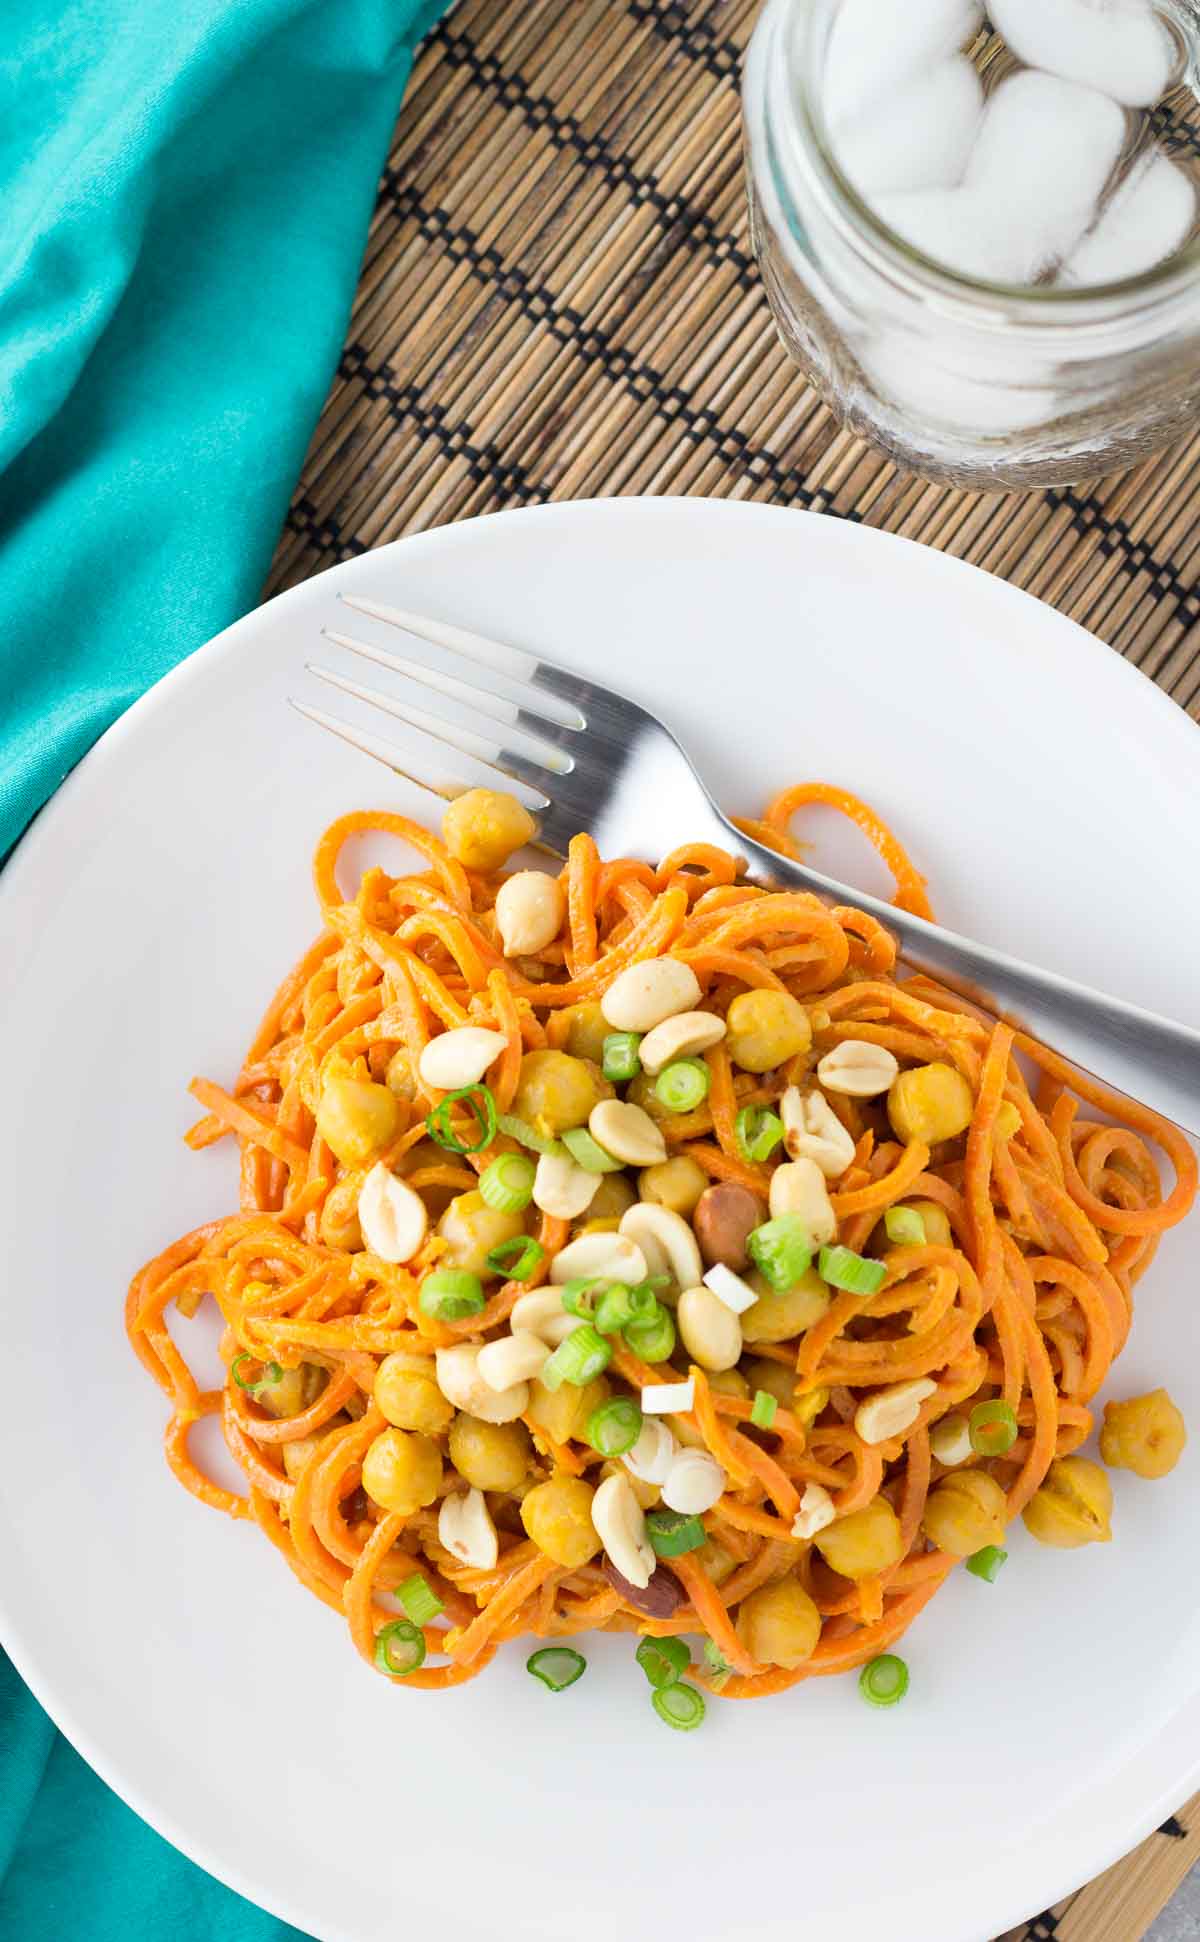 Spiralized Sweet Potato Noodles with Sweet & Spicy Pulled Pork Recipe